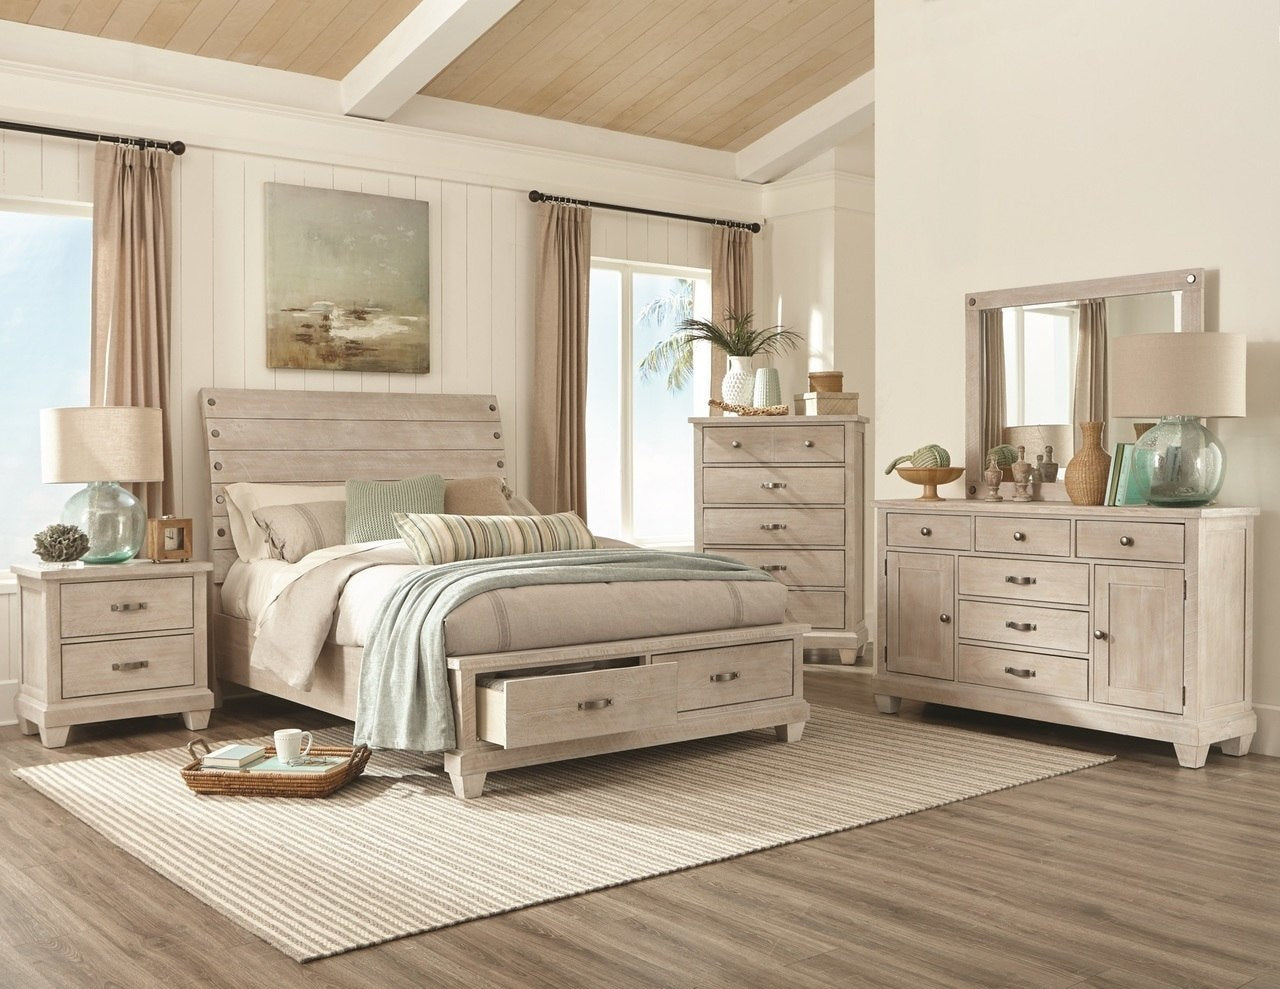 bedroom room with white wash furniture